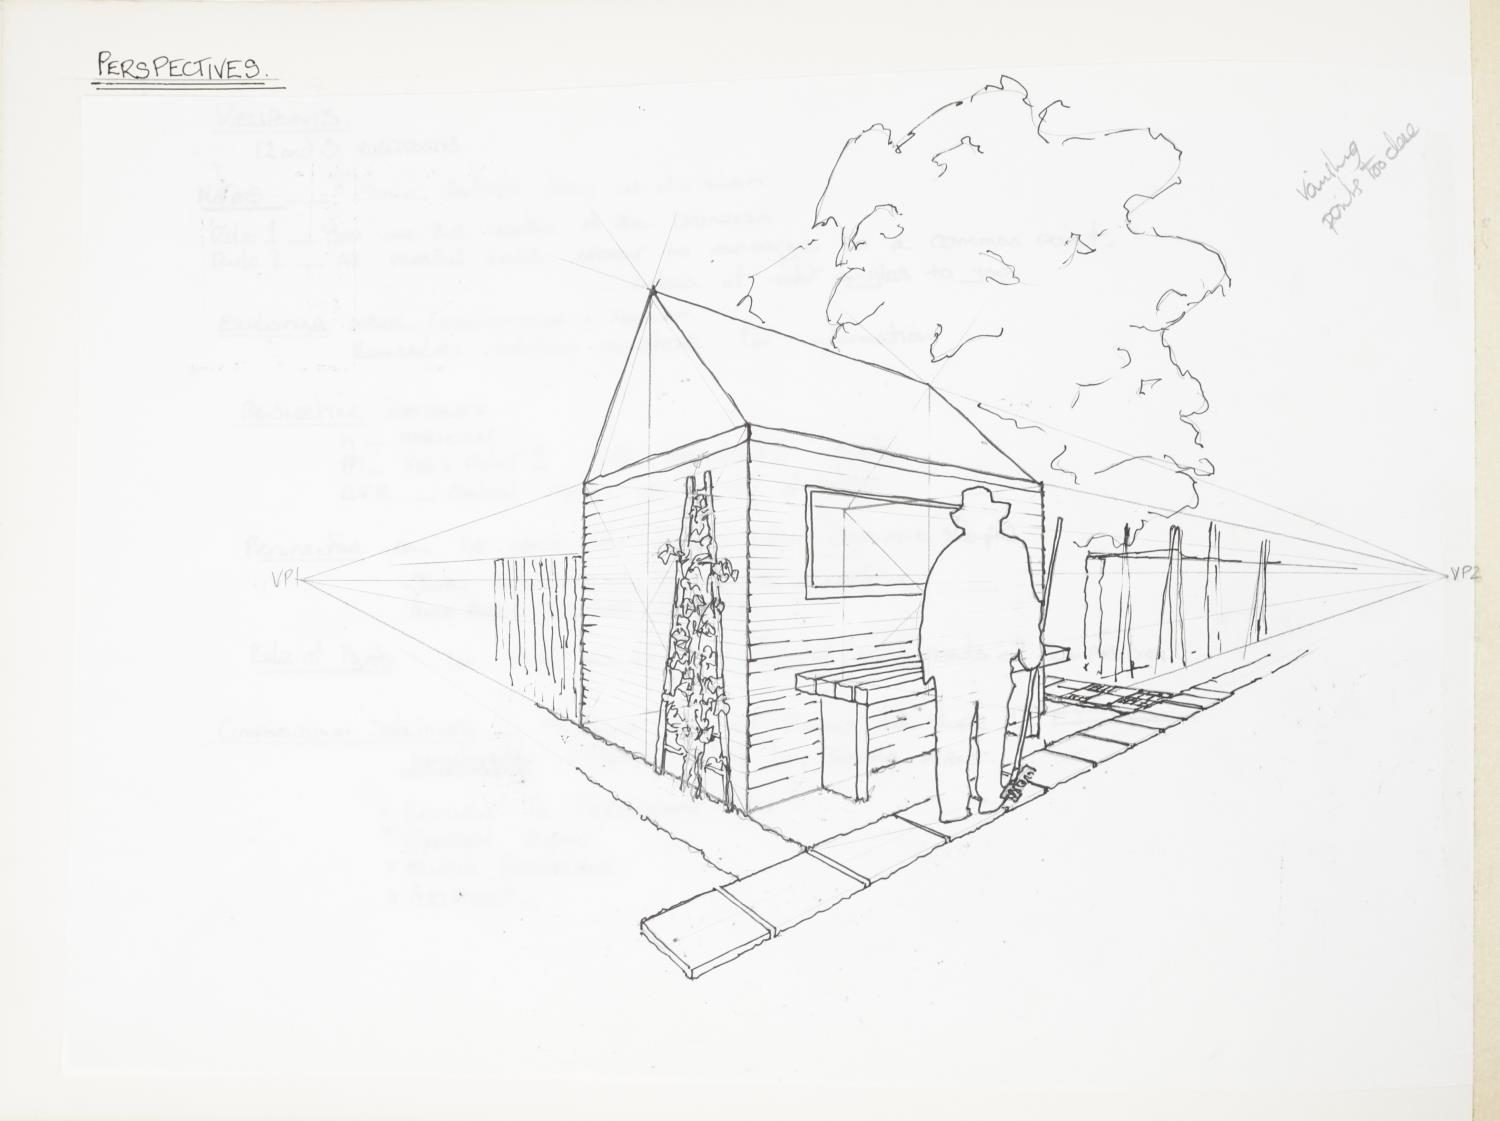 Neil Wilkinson - Folio of drawings and works from Brighton Art College, overall 42cm x 30cm - Image 9 of 18